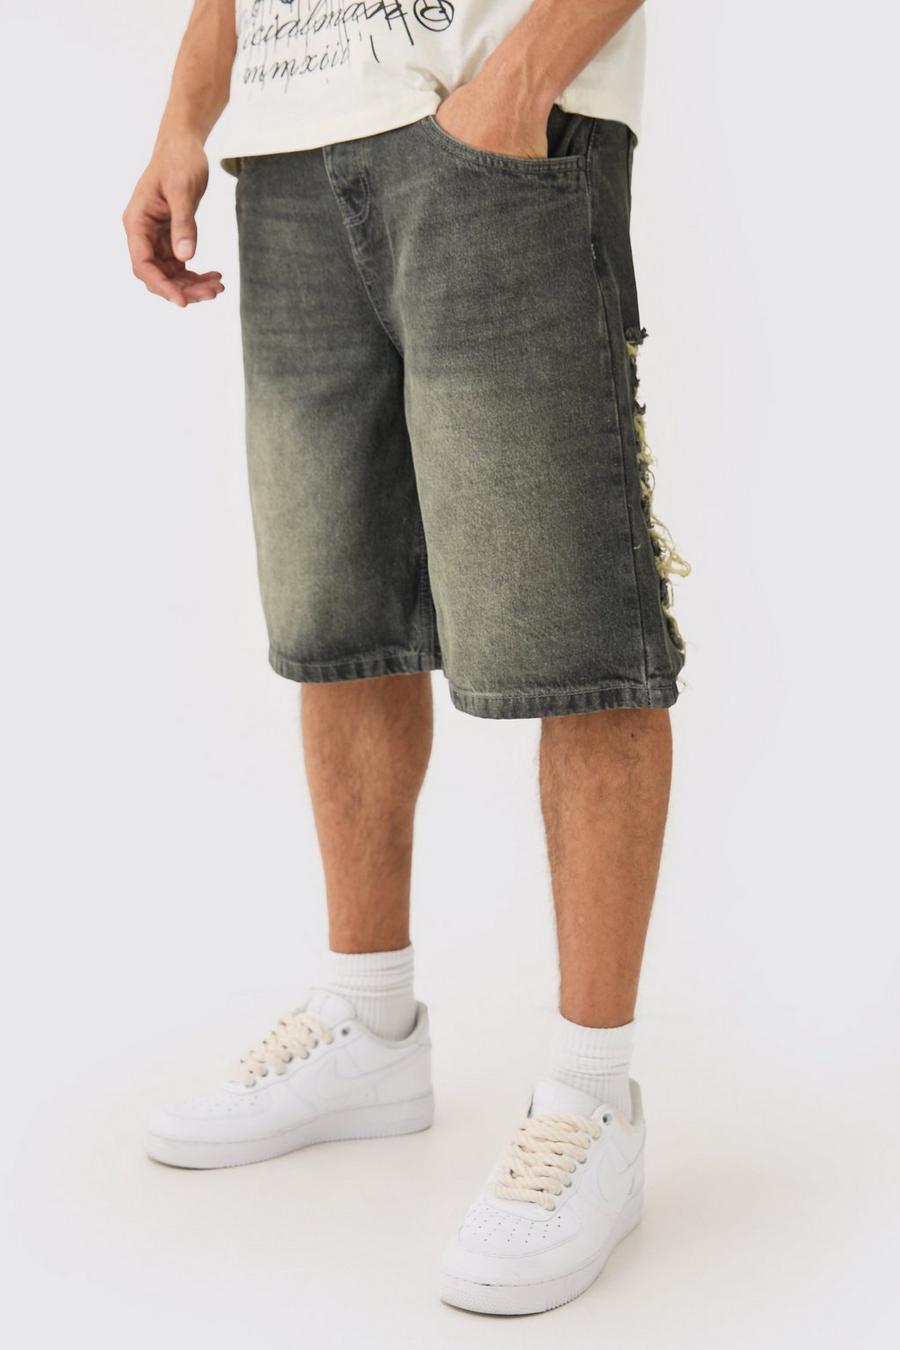 Relaxed Rigid Extreme Ripped Denim Jorts In Antique Grey